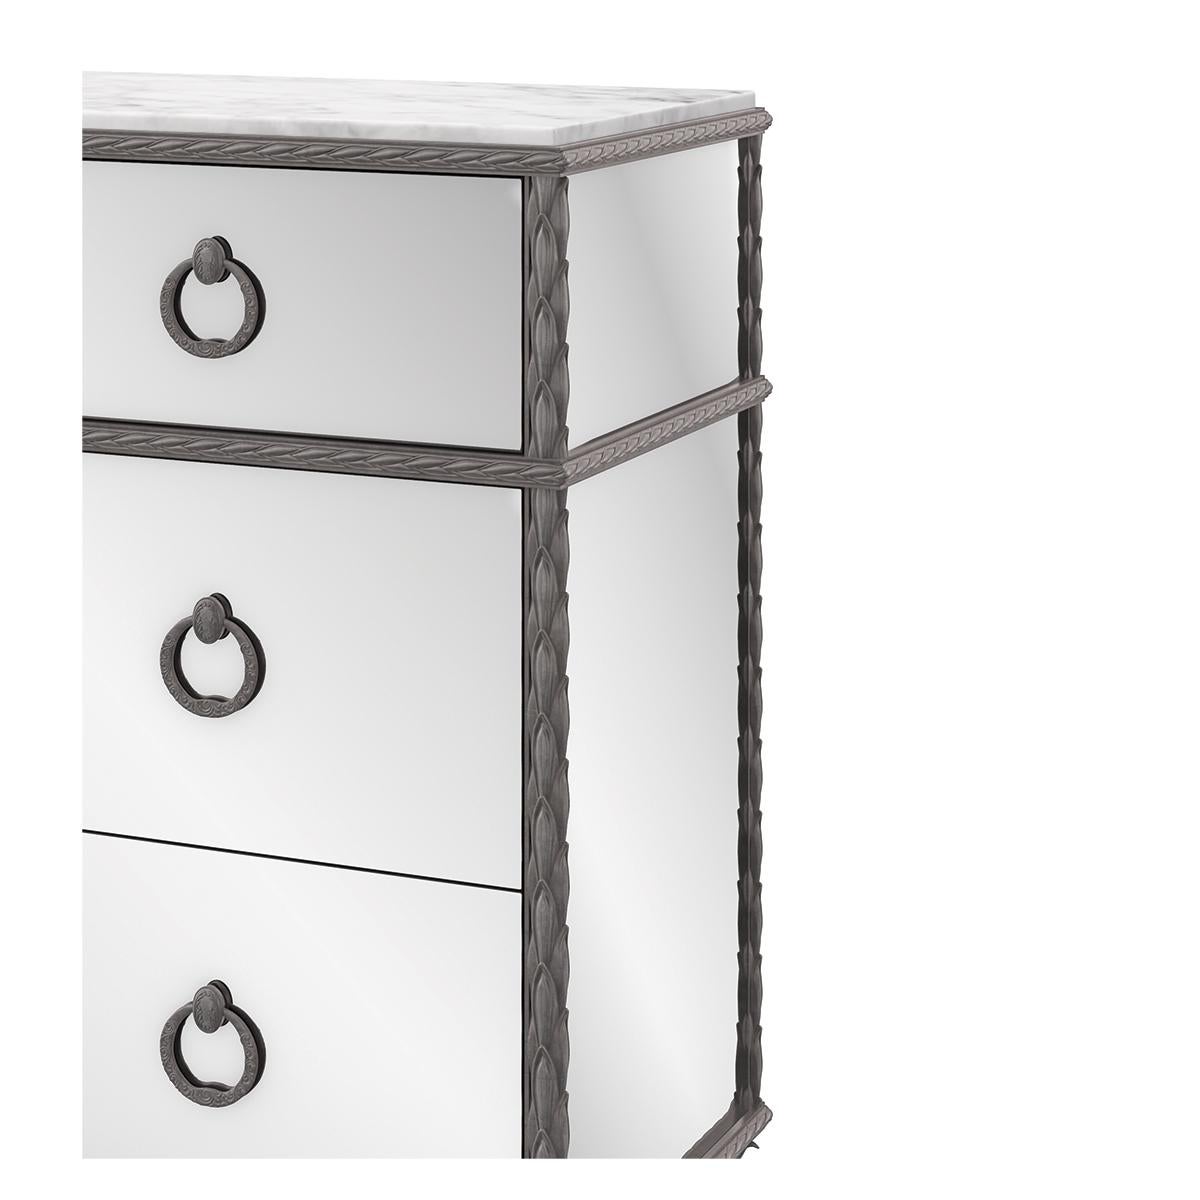 This dresser offers a stunning fusion of form and function, measuring generously to accommodate a wide array of wardrobe essentials.

The dresser features mirrored front and end panels, creating a dazzling reflective surface that enhances the light